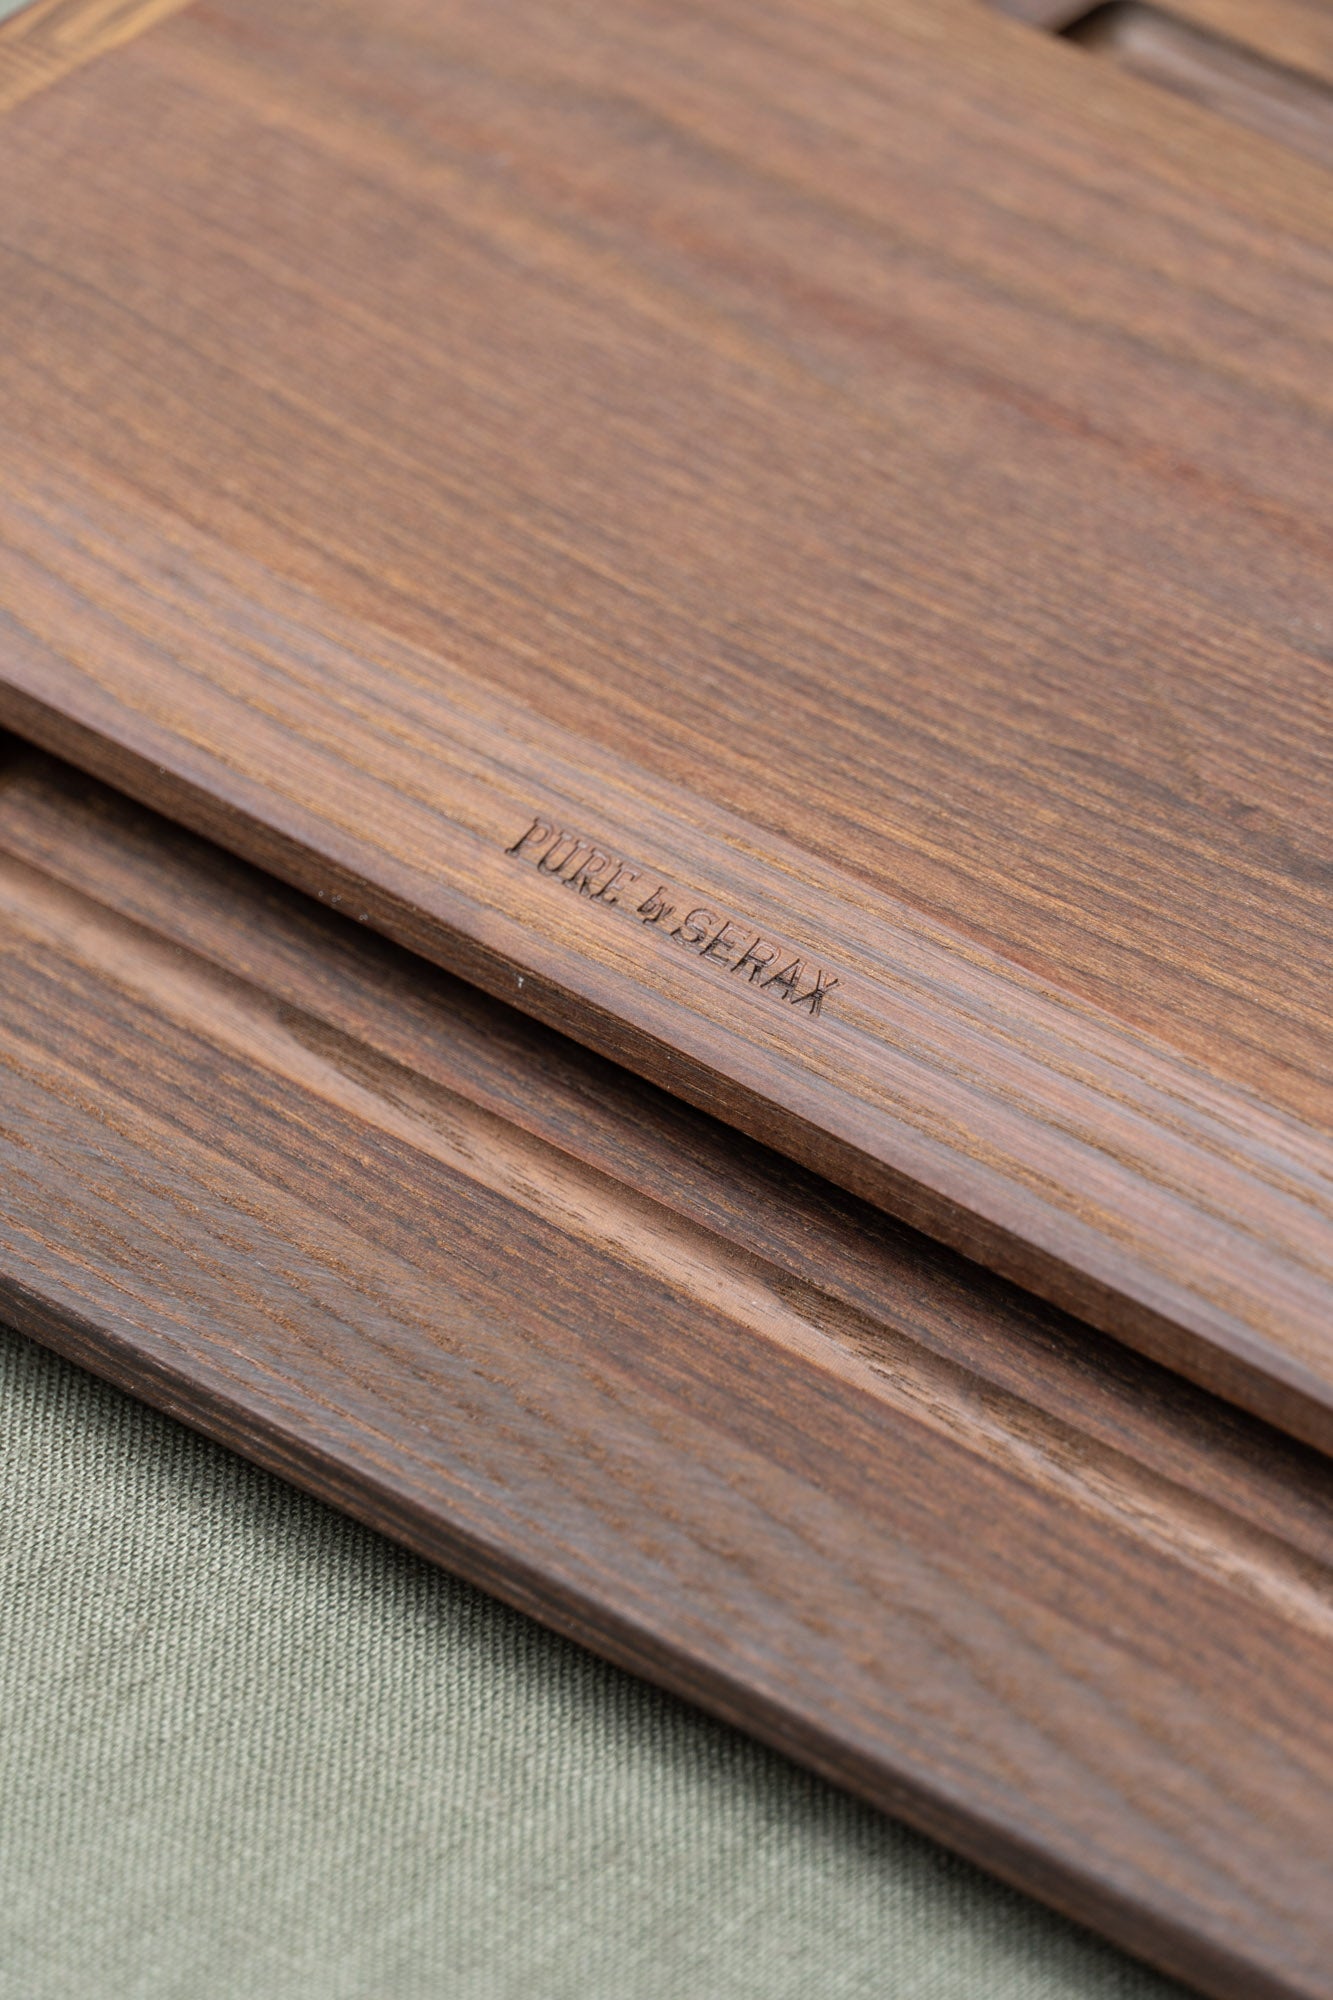 Detail of brand engraving in the Serax Pascale Naessens Pure Cutting Board – Enter The Loft